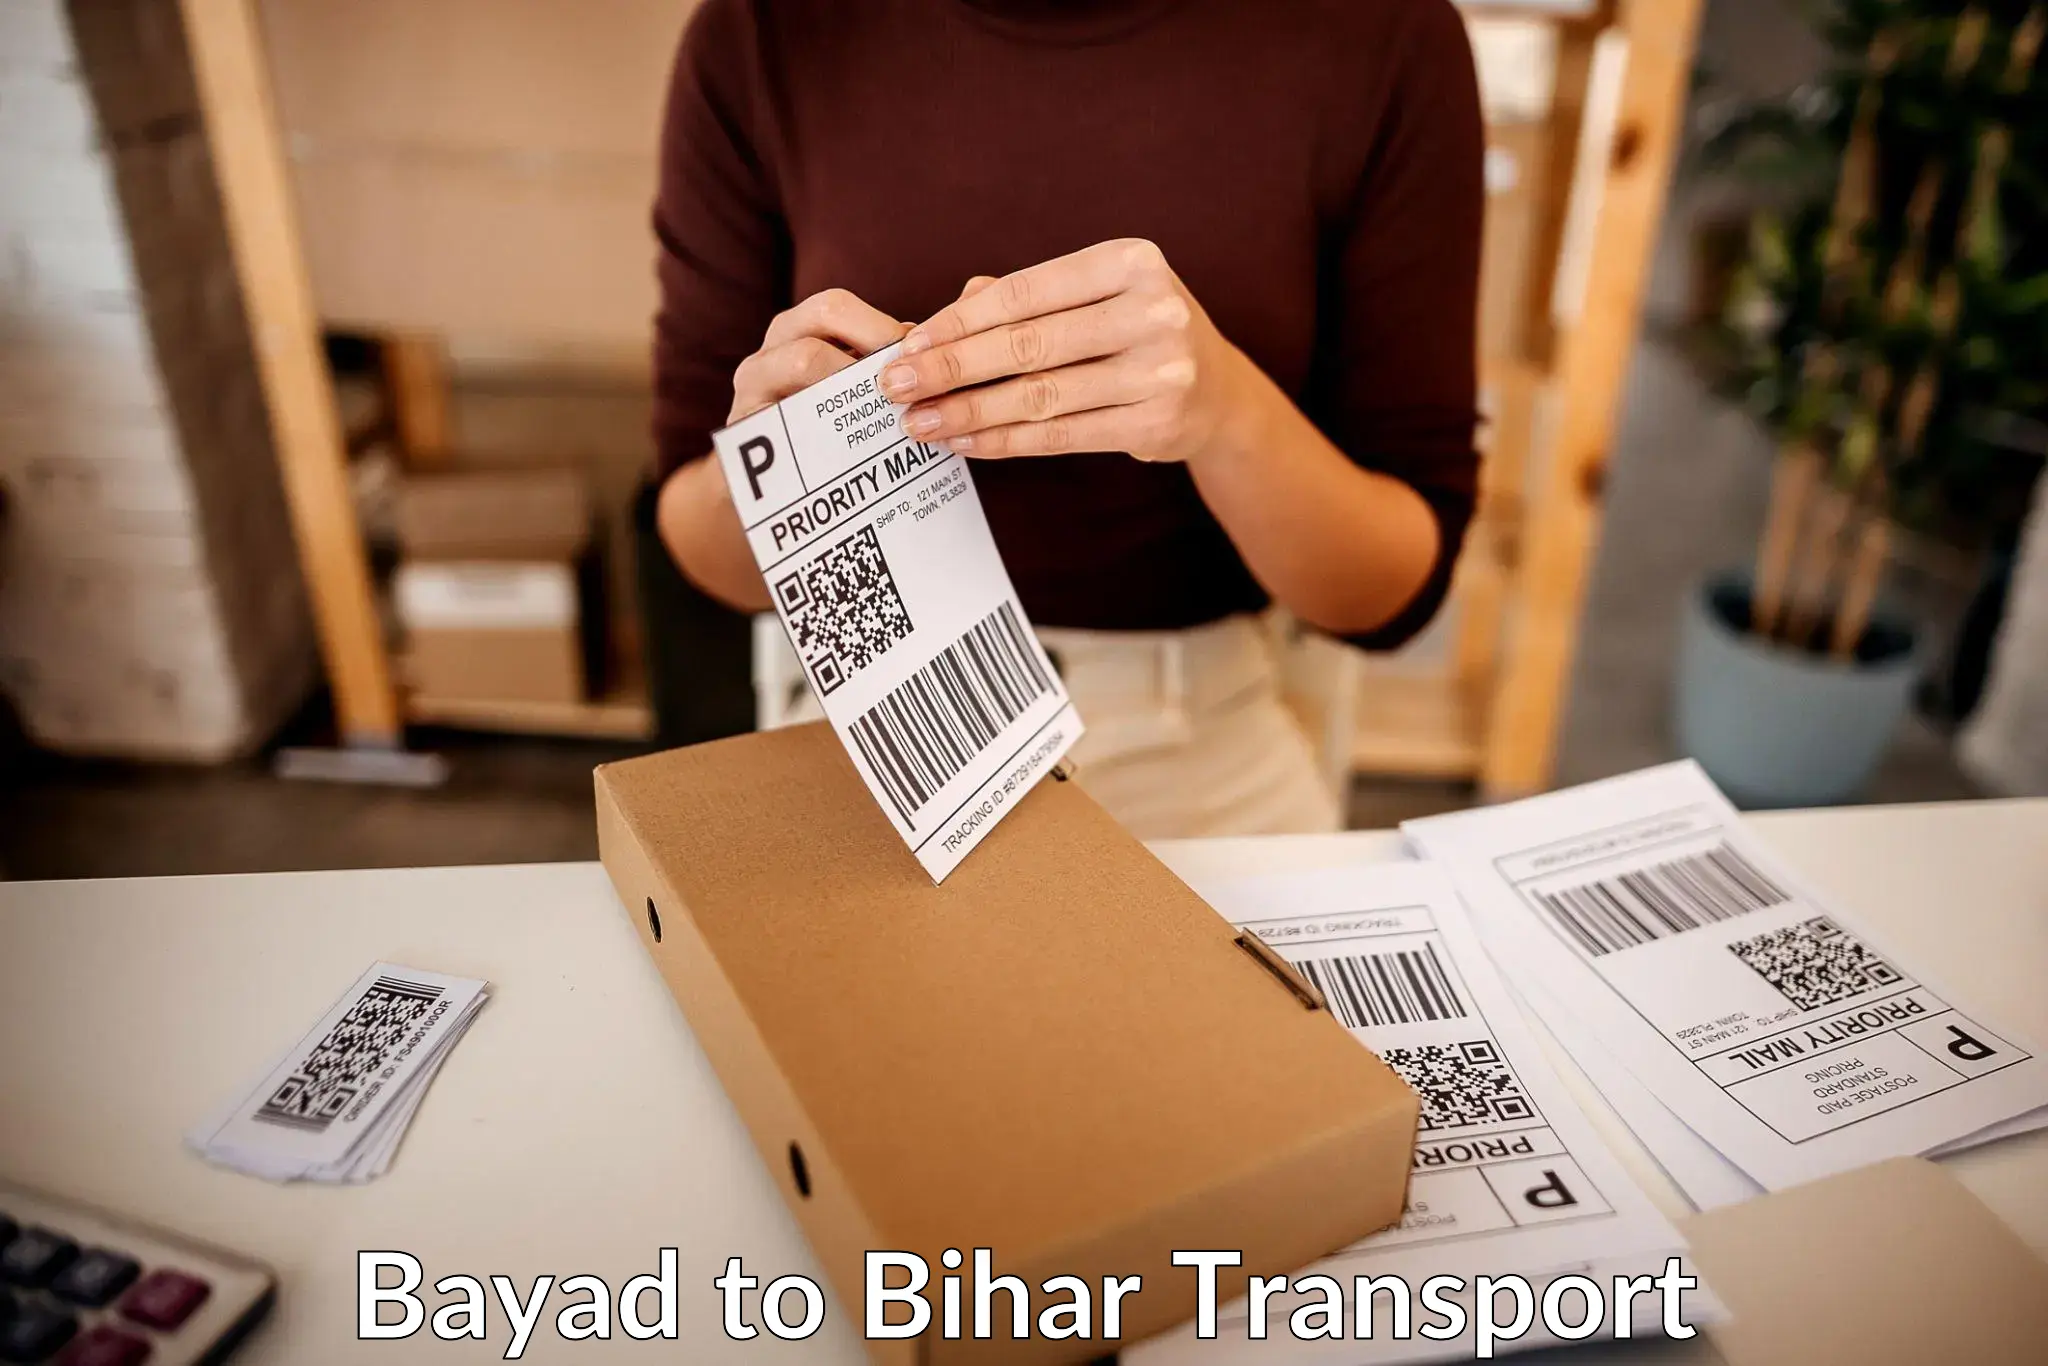 Shipping services Bayad to Dehri